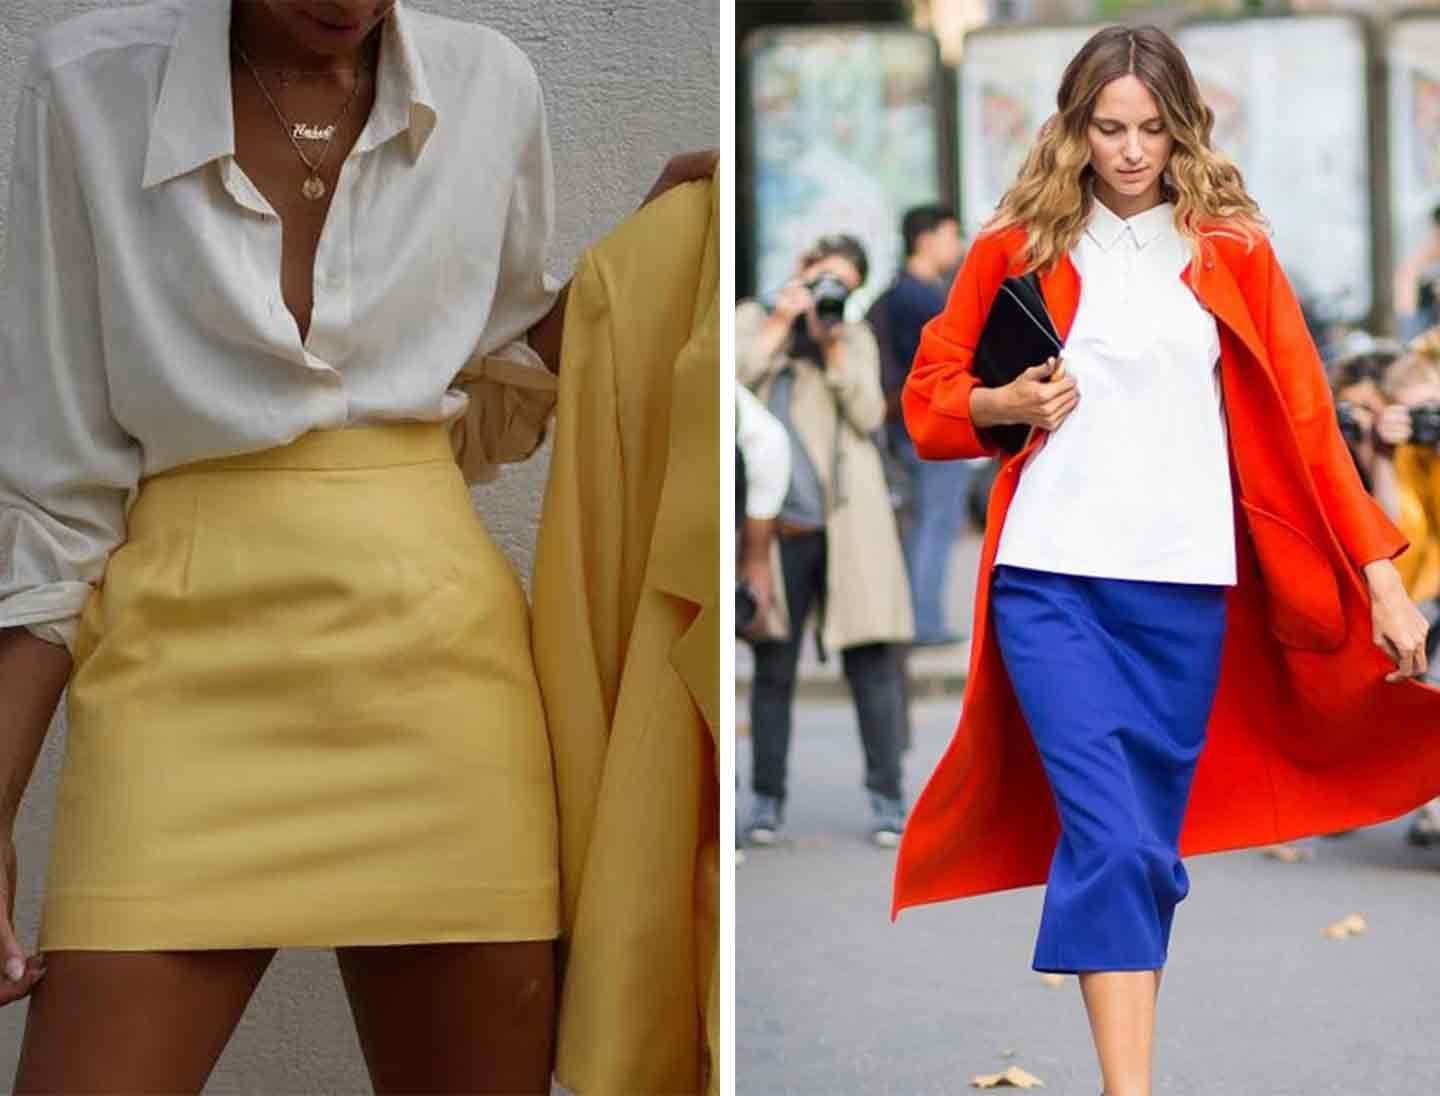 two images of woman wearing white shirts with colourful skirts